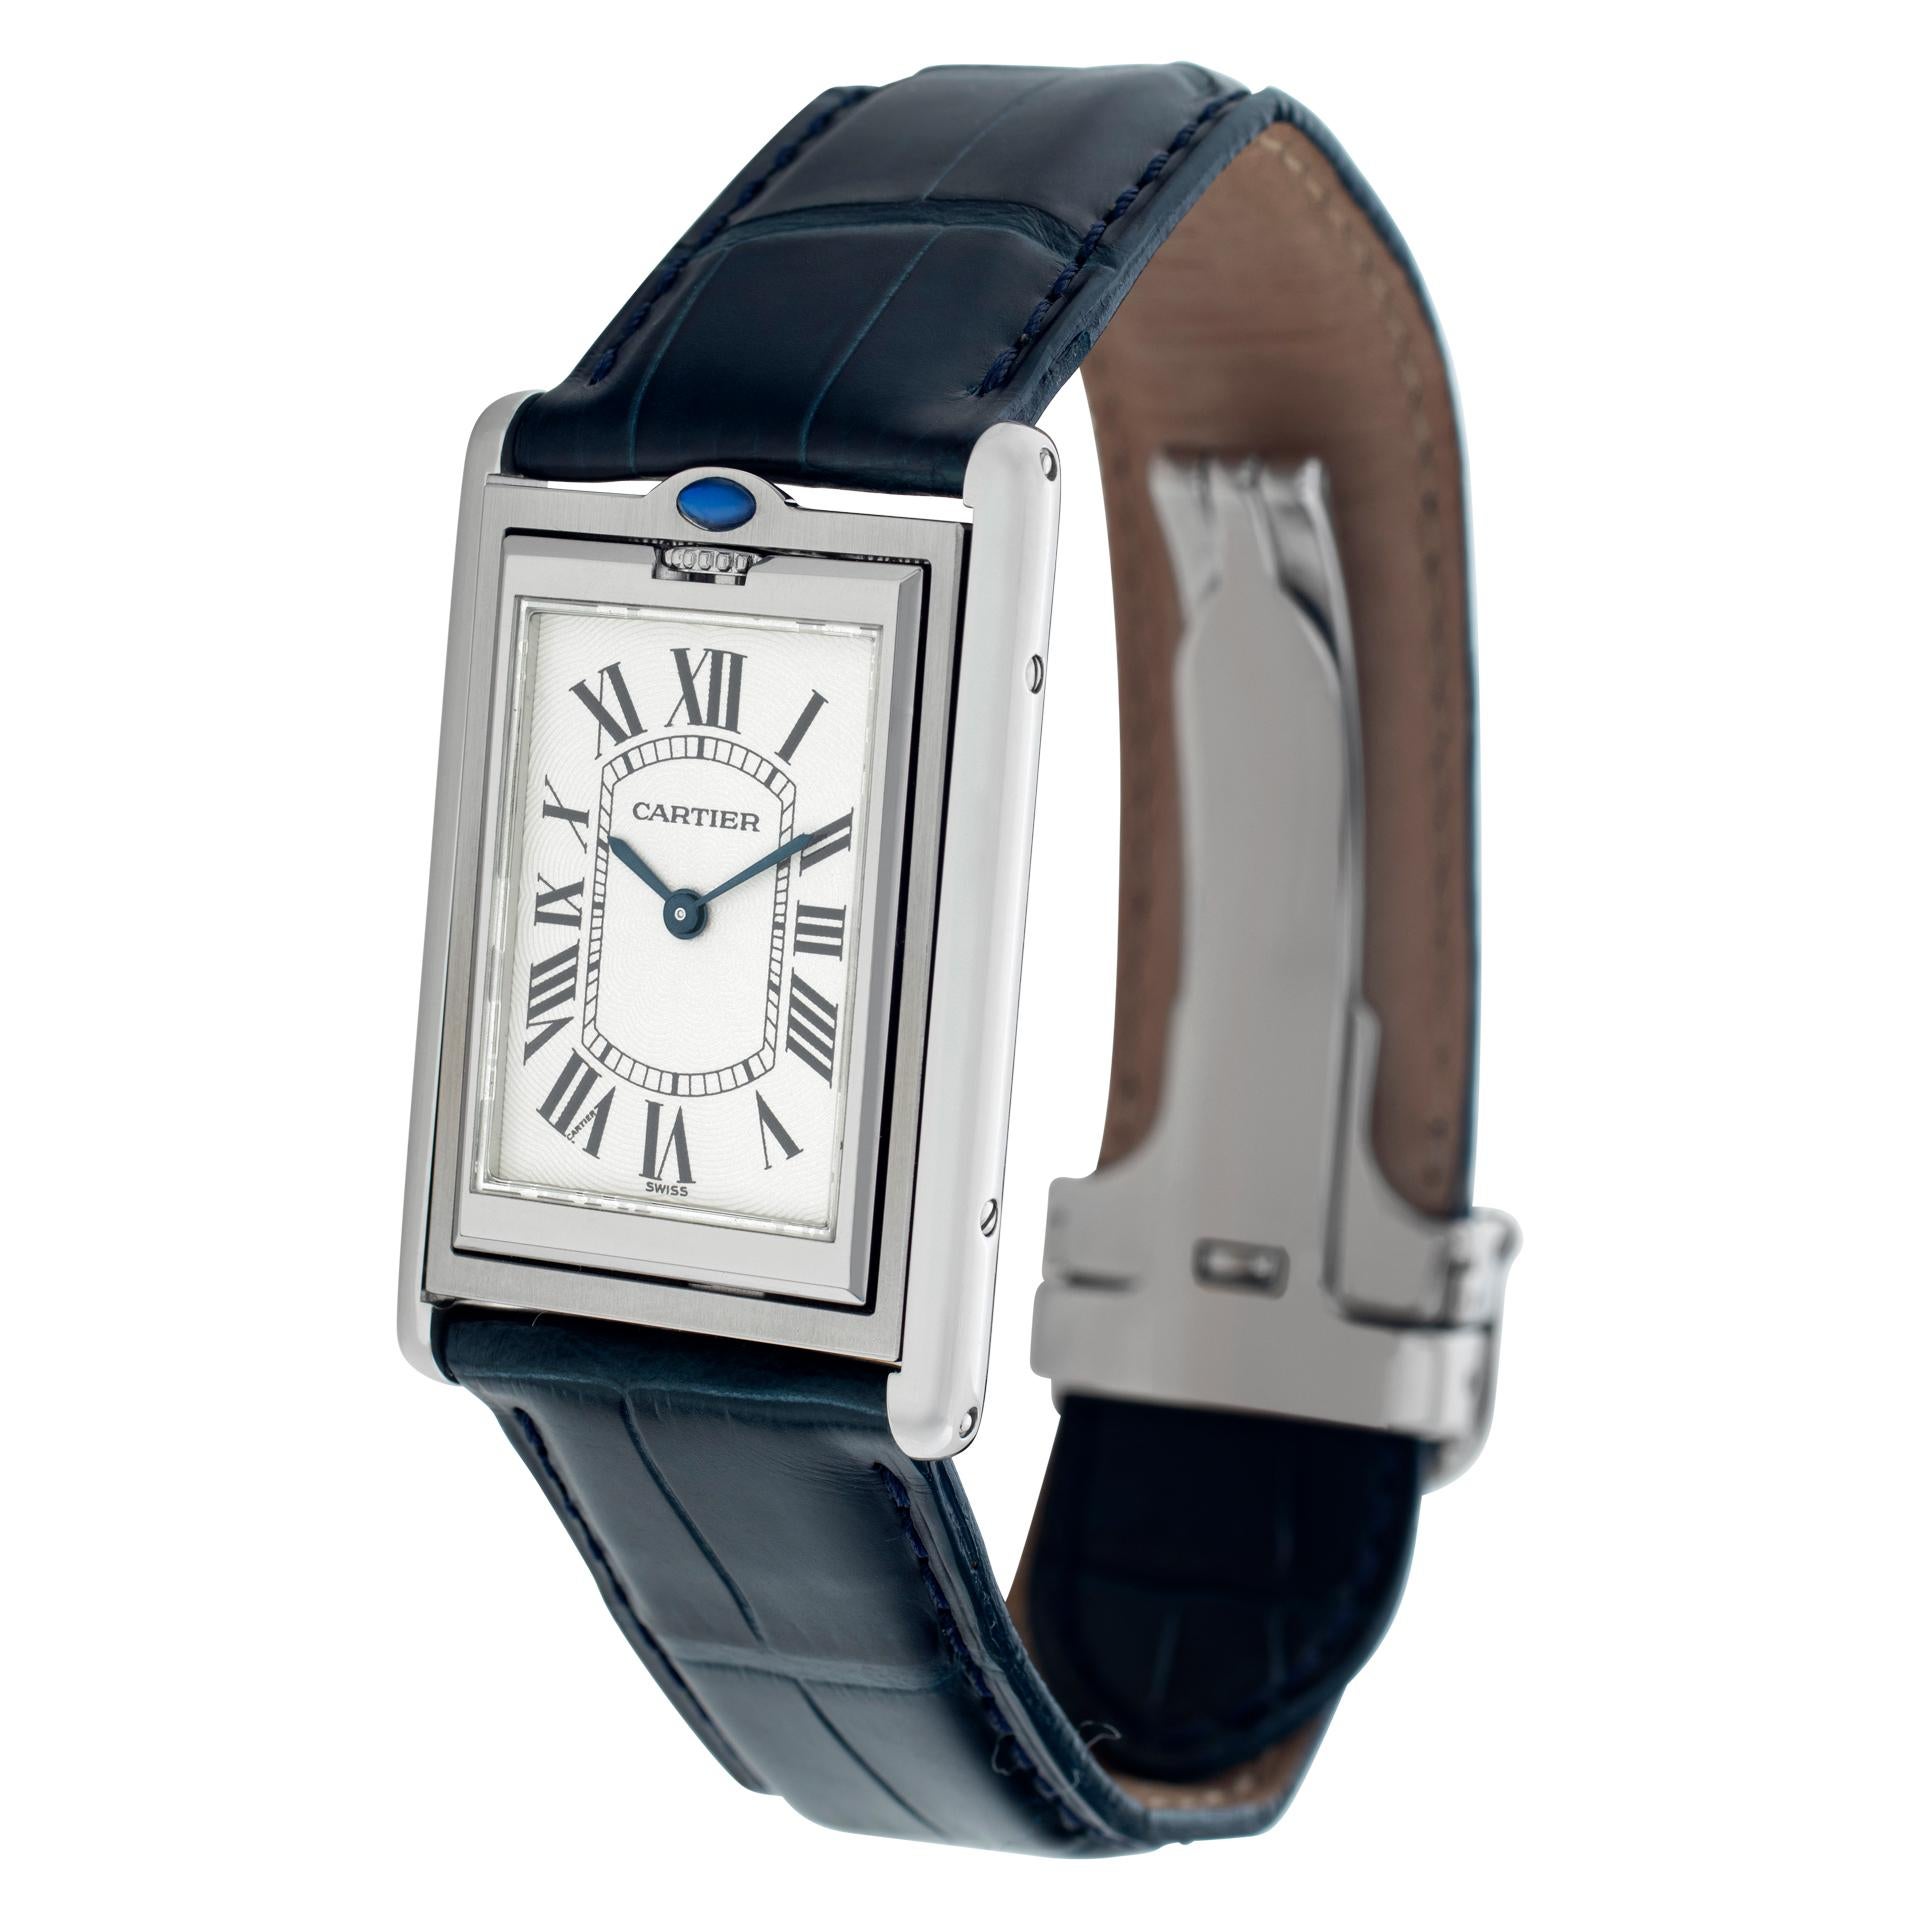 Cartier Tank Basculante in stainless steel on leather strap with Cartier deployant buckle. Manual. 31 mm x 25.5 mm case size. With box and papers. Ref 2390 / w1011358. Fine Pre-owned Cartier Watch. Certified preowned Classic Cartier Tank Basculante